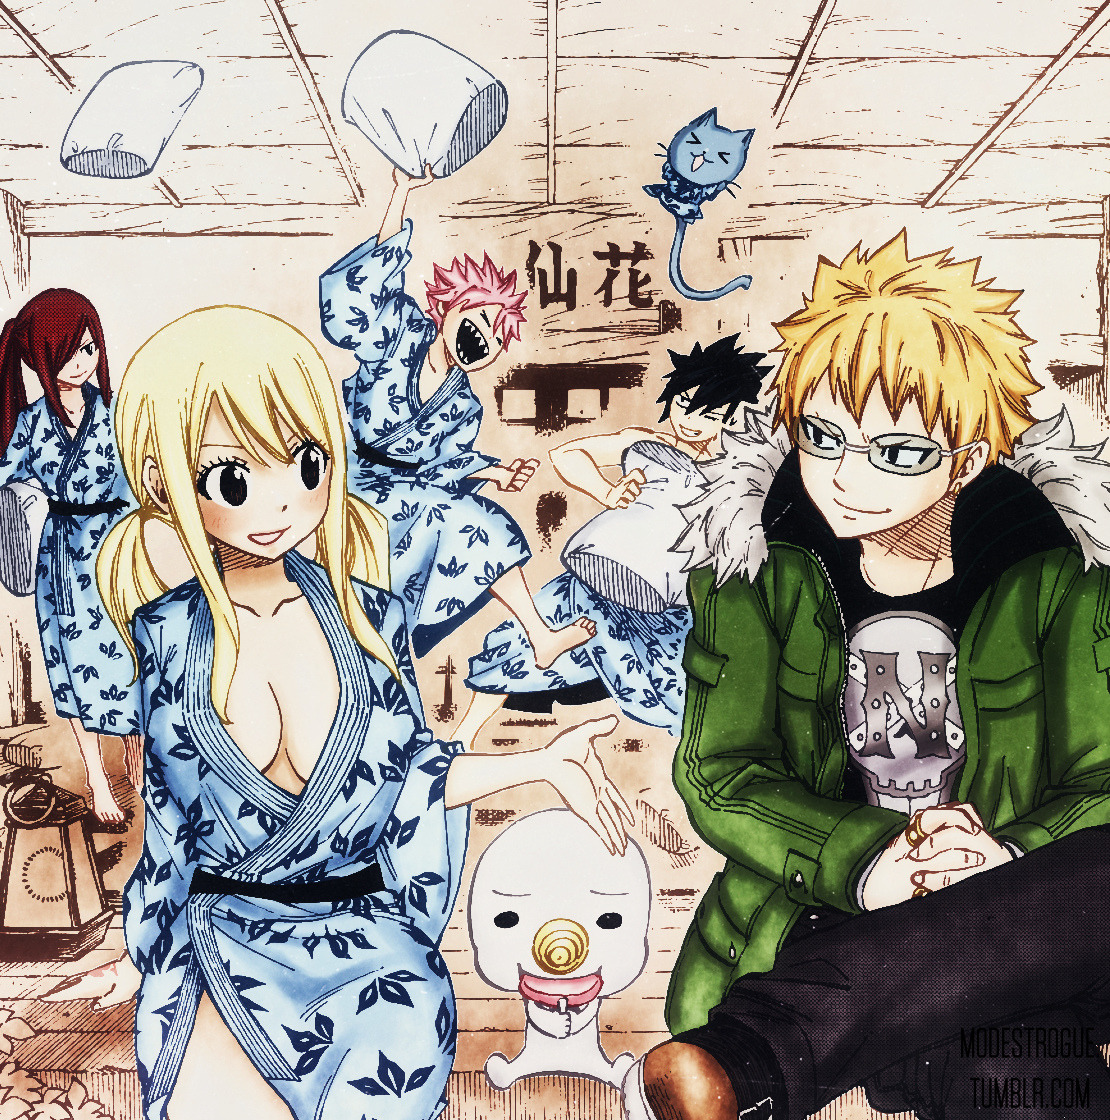 Fairy Tail Manga Currently in Final Arc